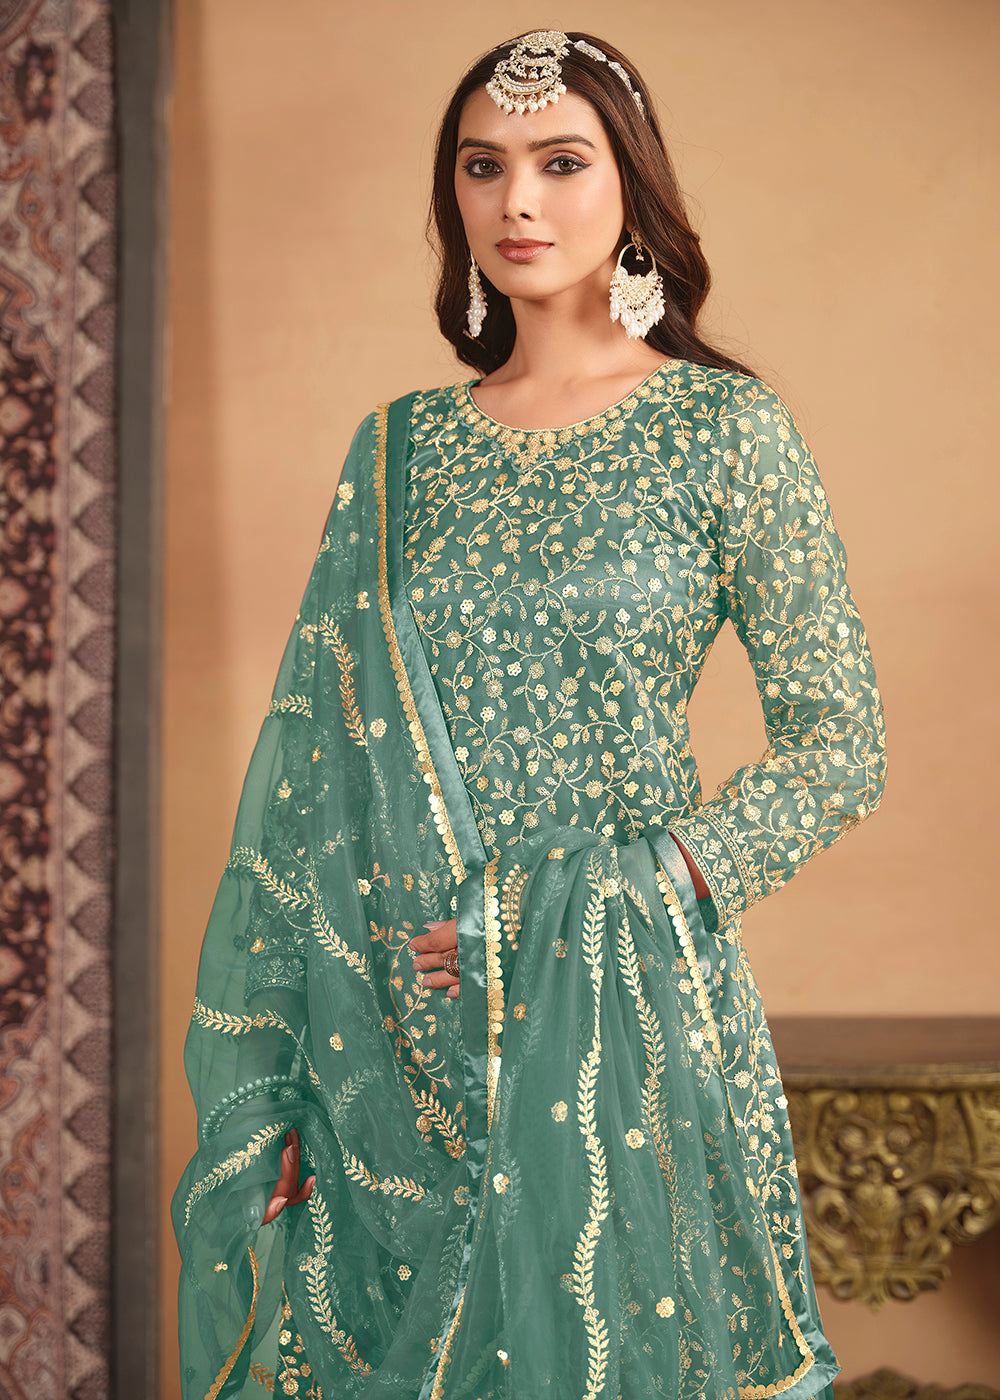 Shop Now Net Mint Green Embroidered Gharara Style Suit Online at Empress Clothing in USA, UK, Canada, Italy & Worldwide. 